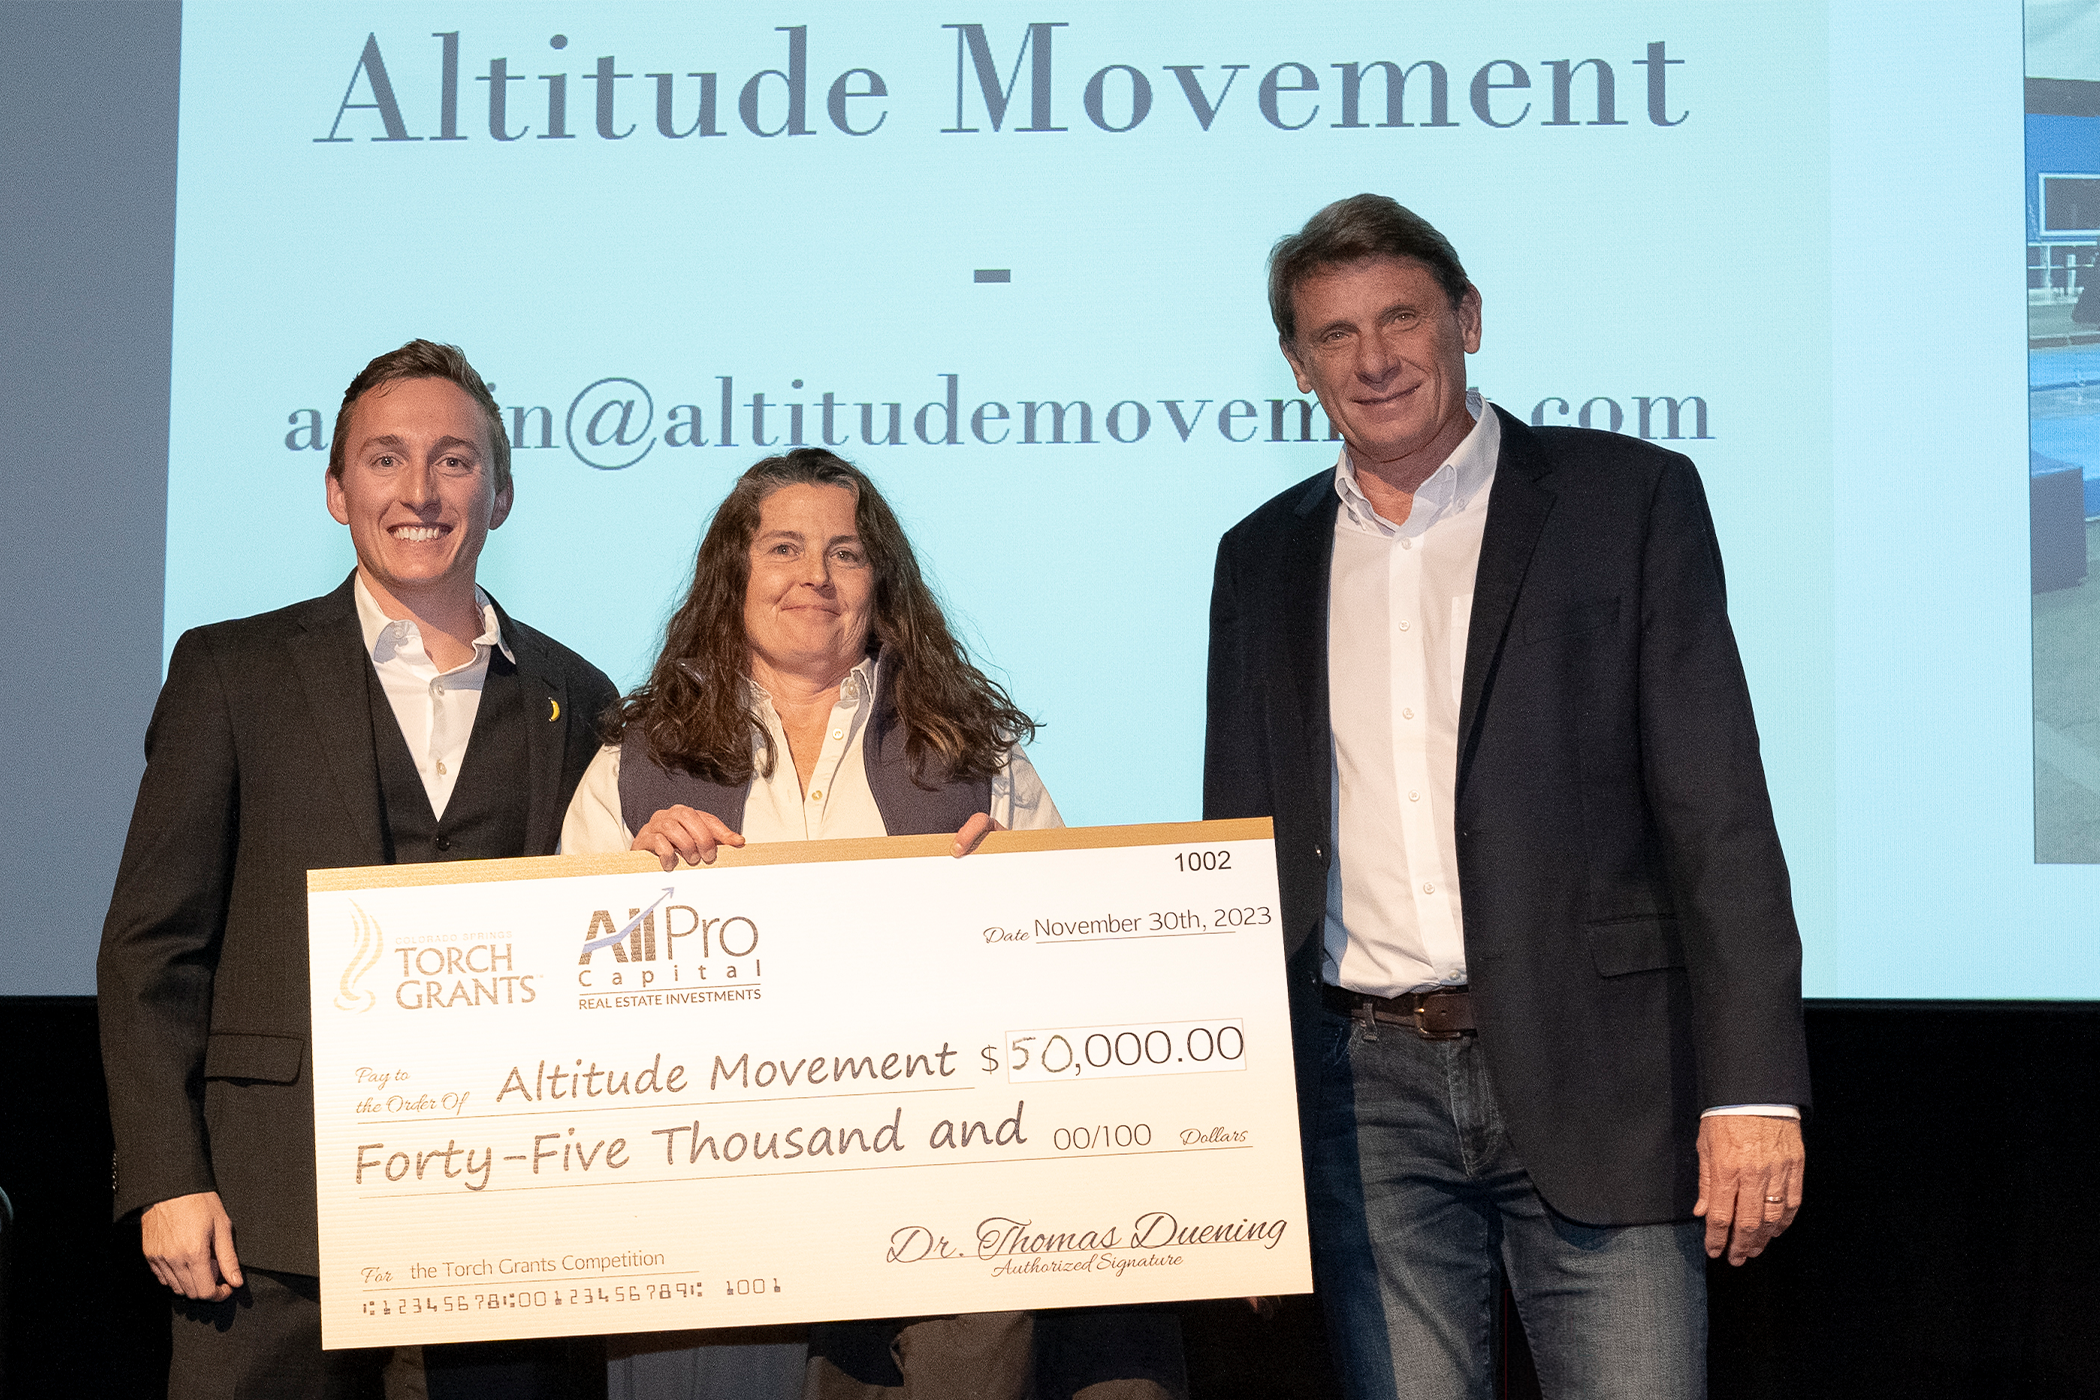 Michelle from Altitude Movement holding her torch grant check